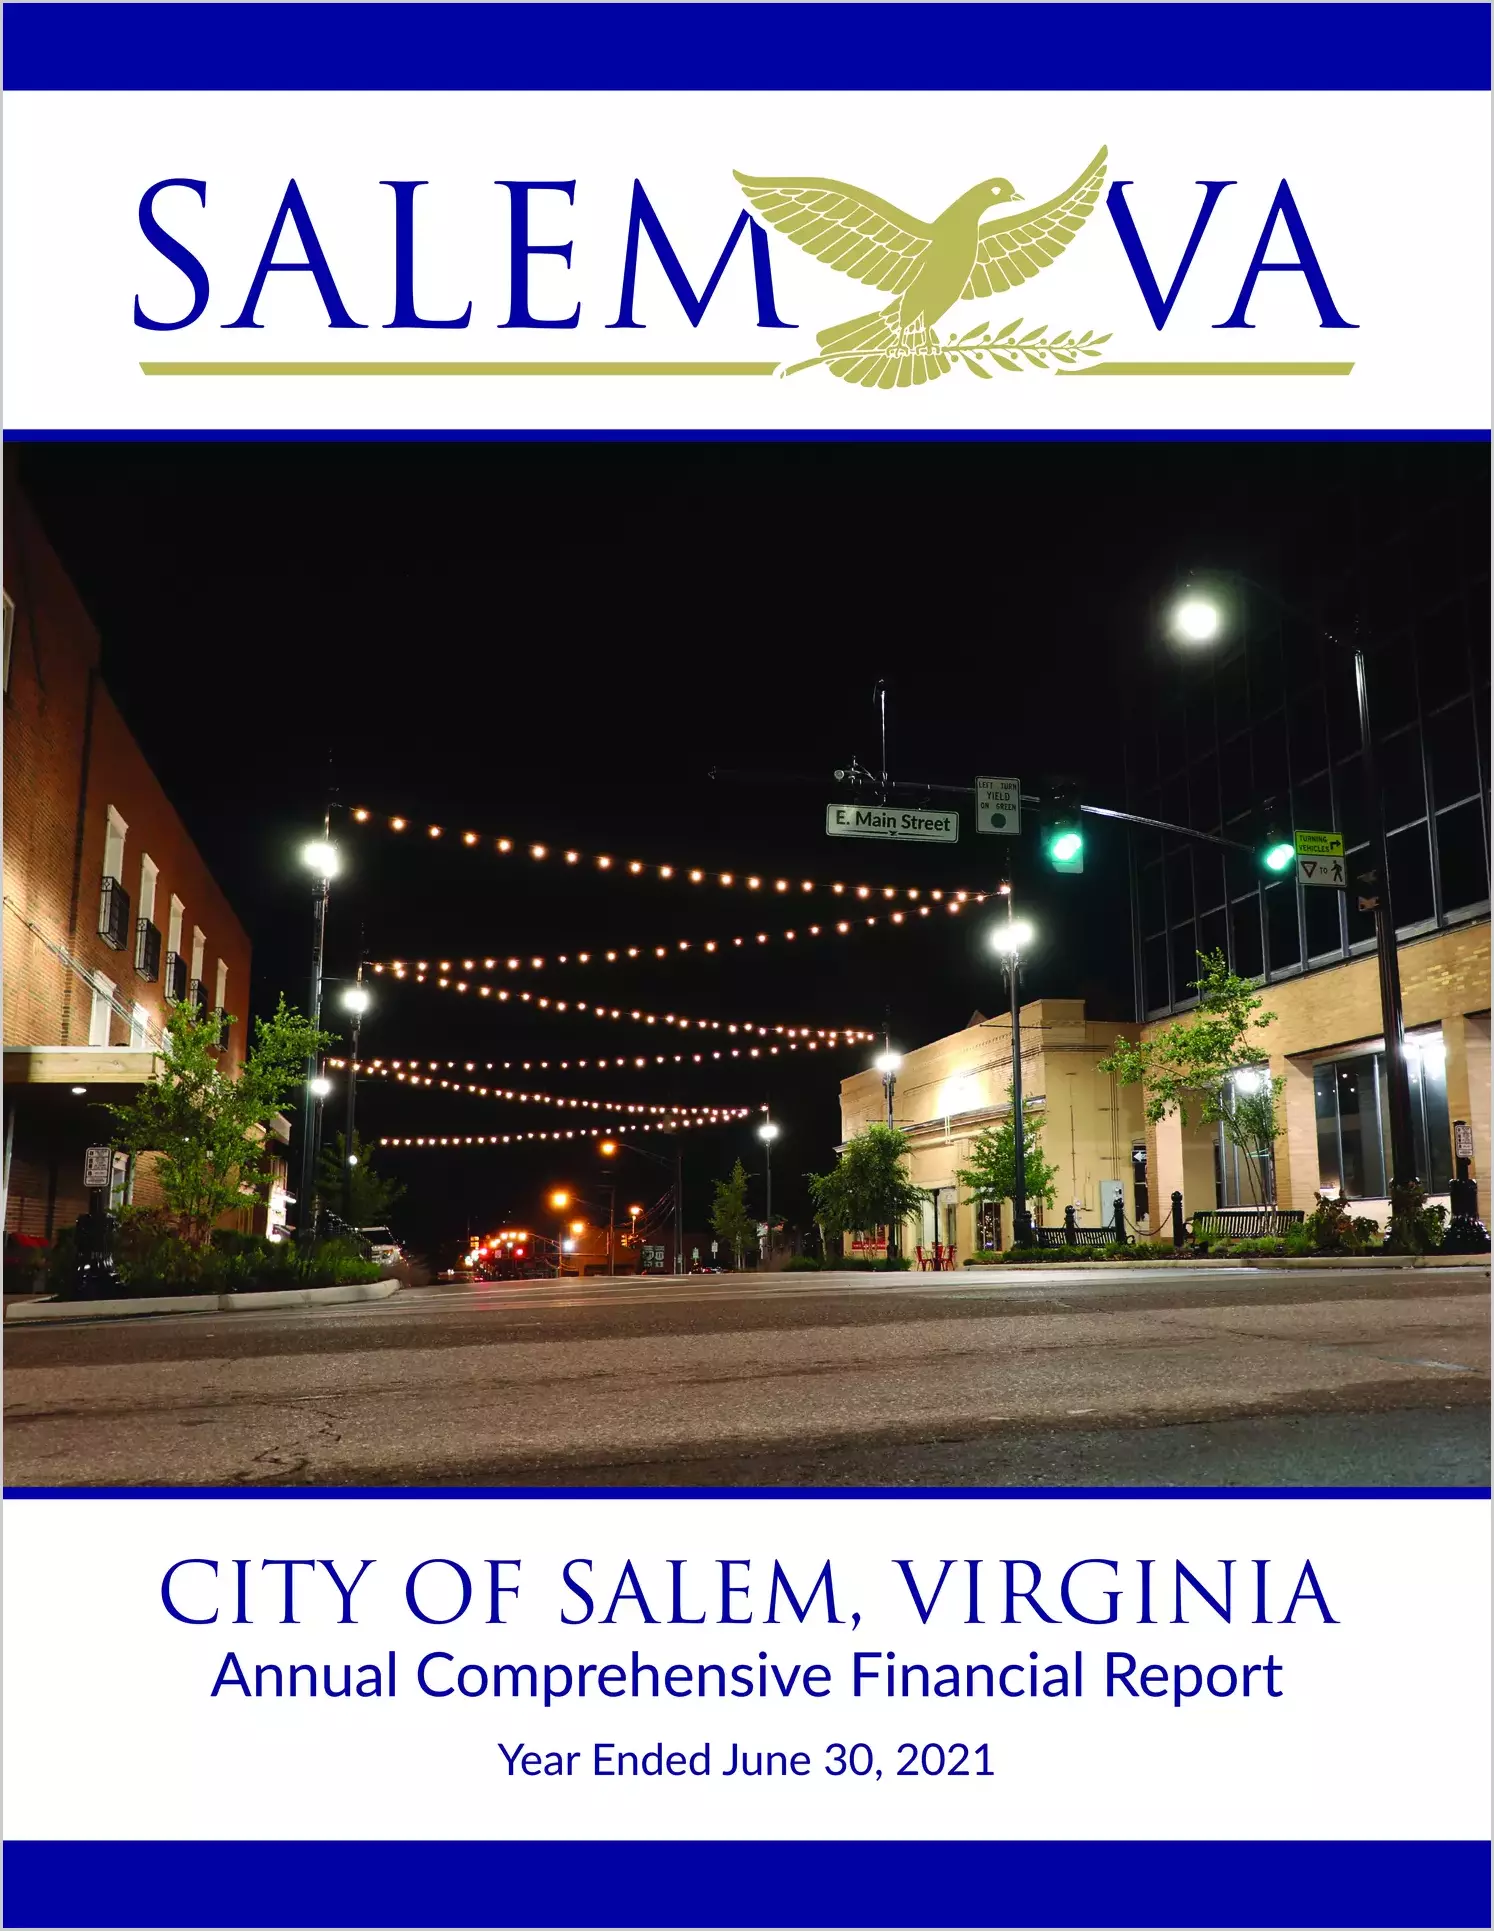 2021 Annual Financial Report for City of Salem